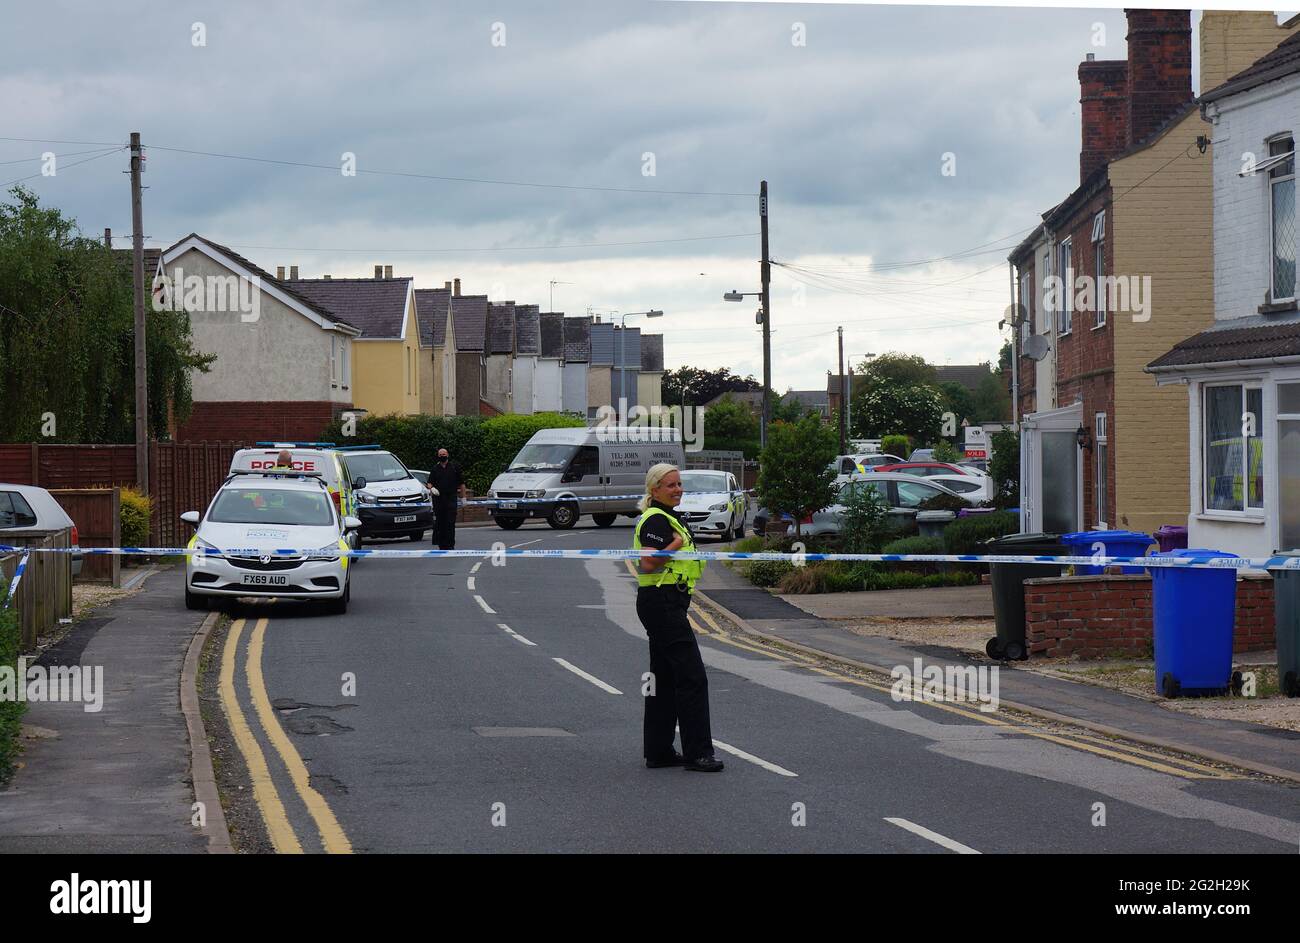 Police cordoned off Wyberton West Rd. after a bomb scare Police car at a house after a bomb scare which resulted in the nearby homes being evacuated Stock Photo